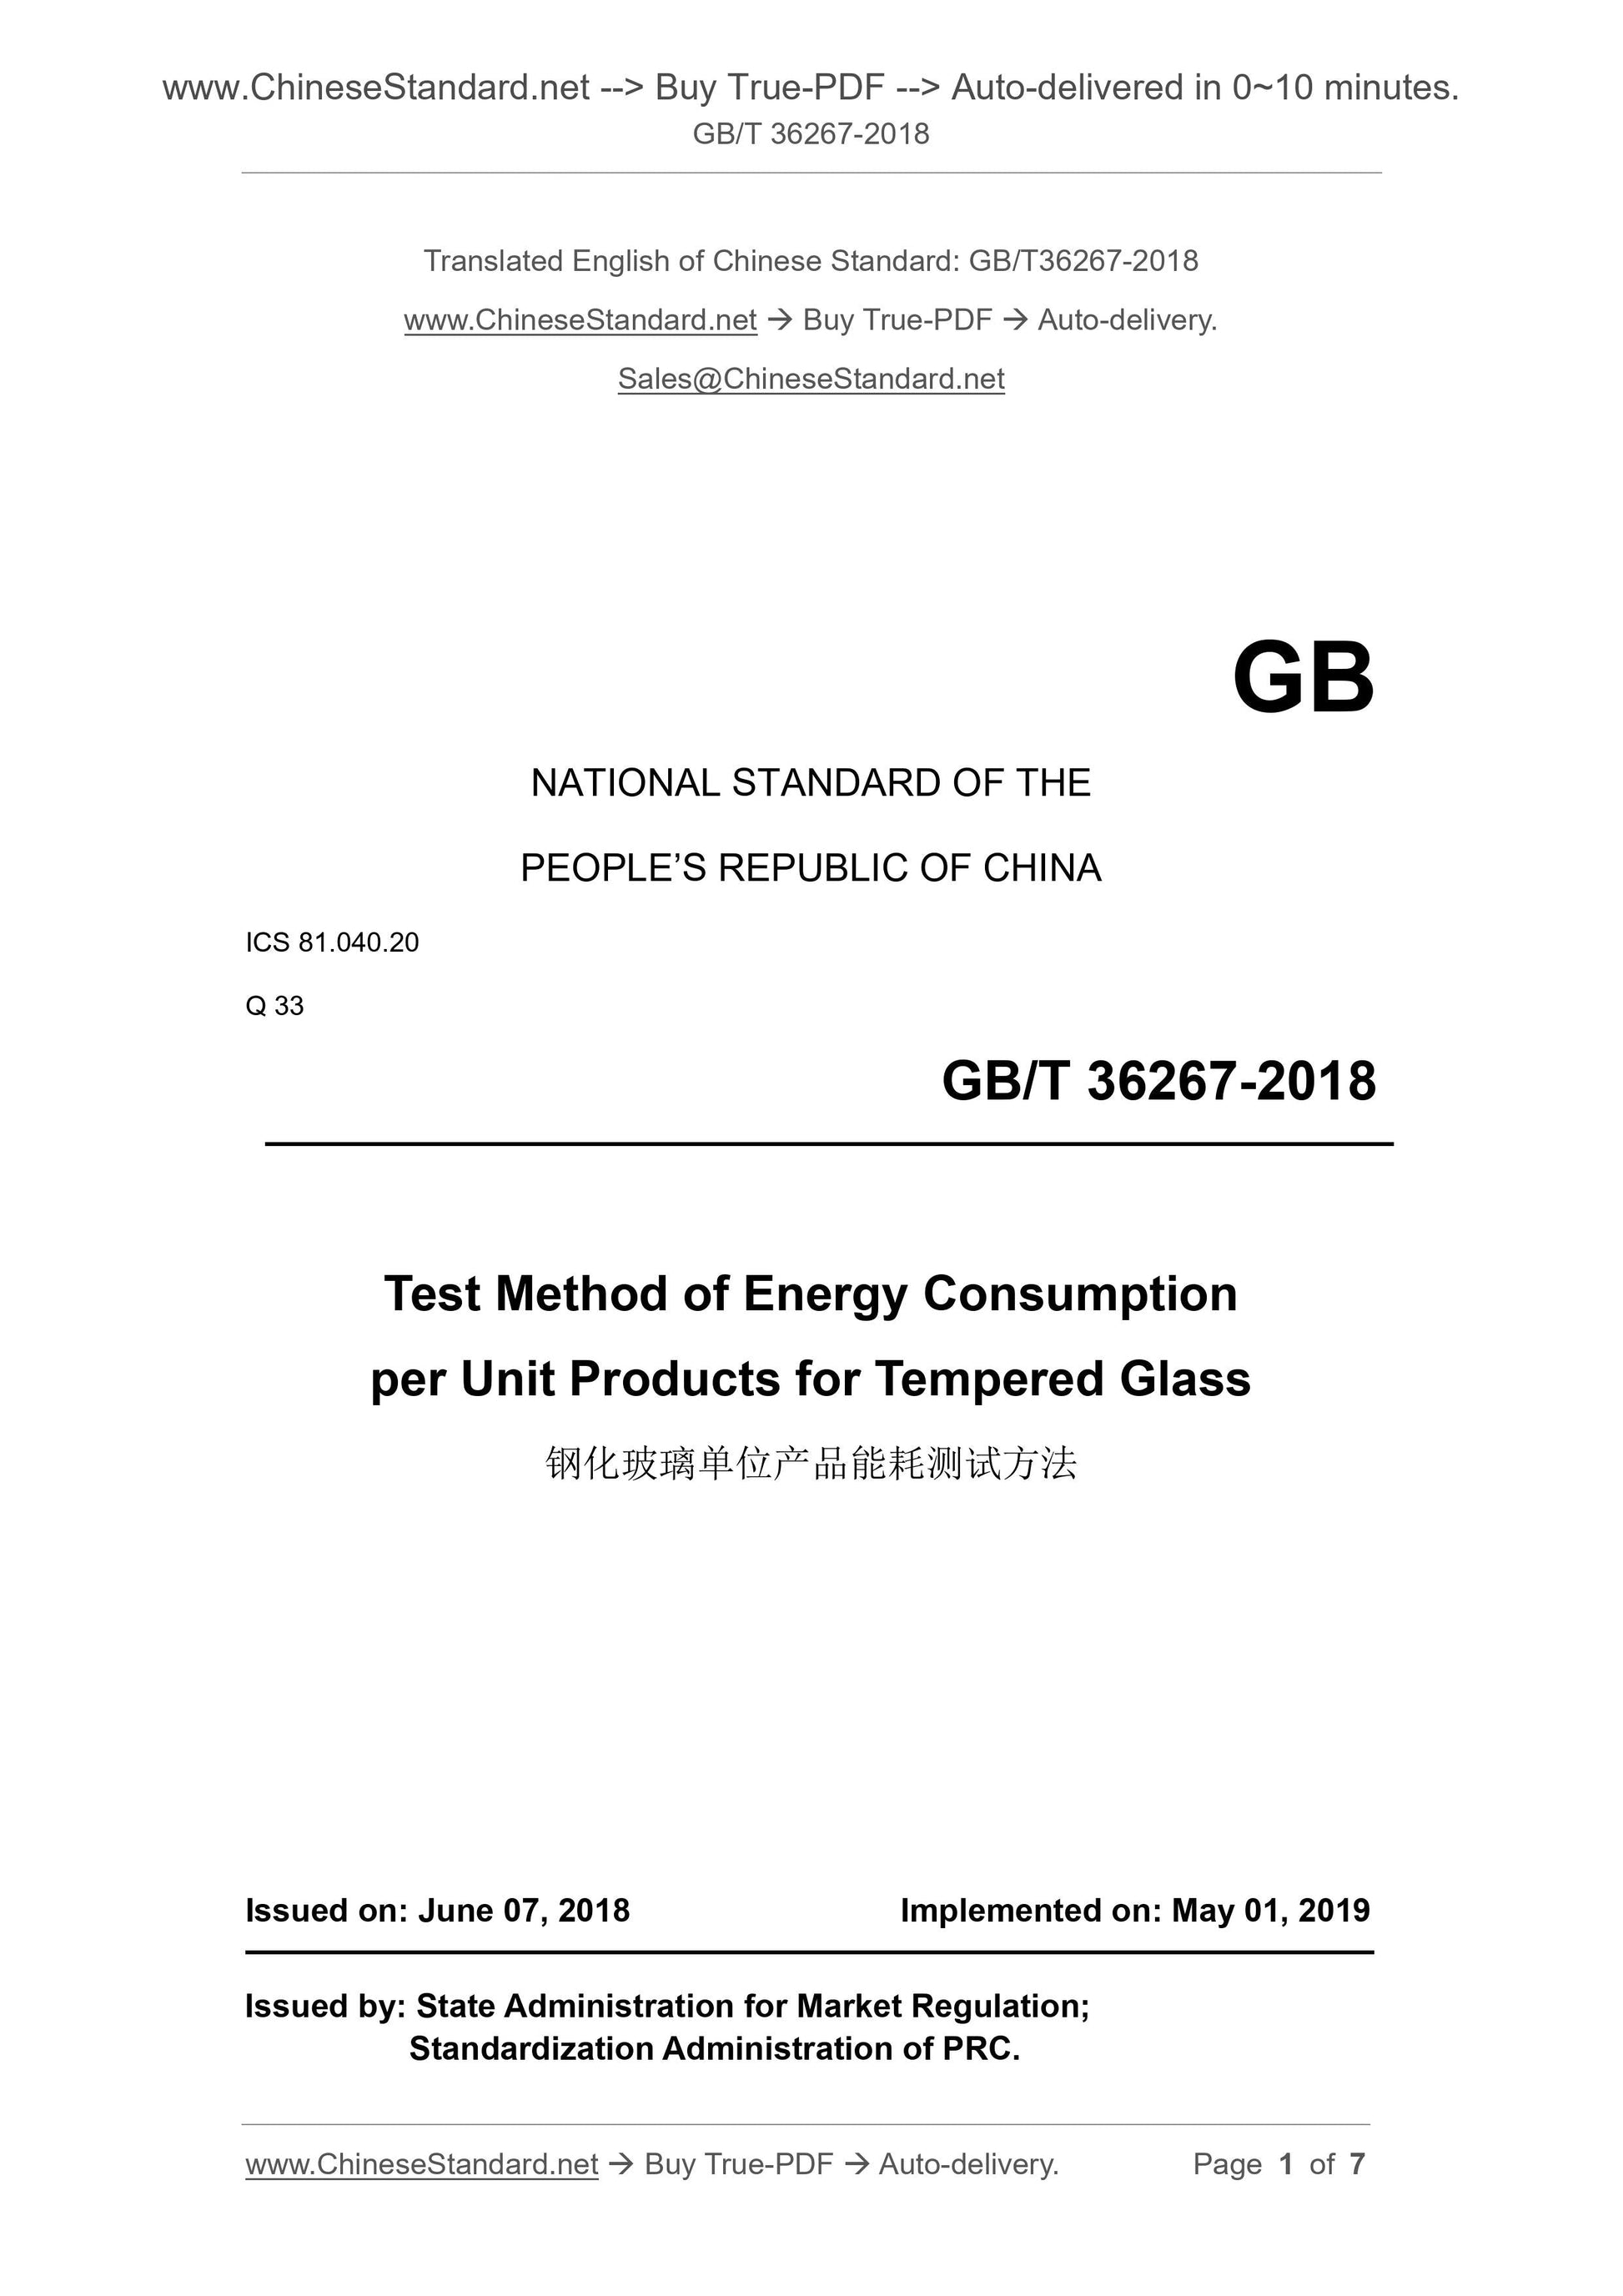 GB/T 36267-2018 Page 1